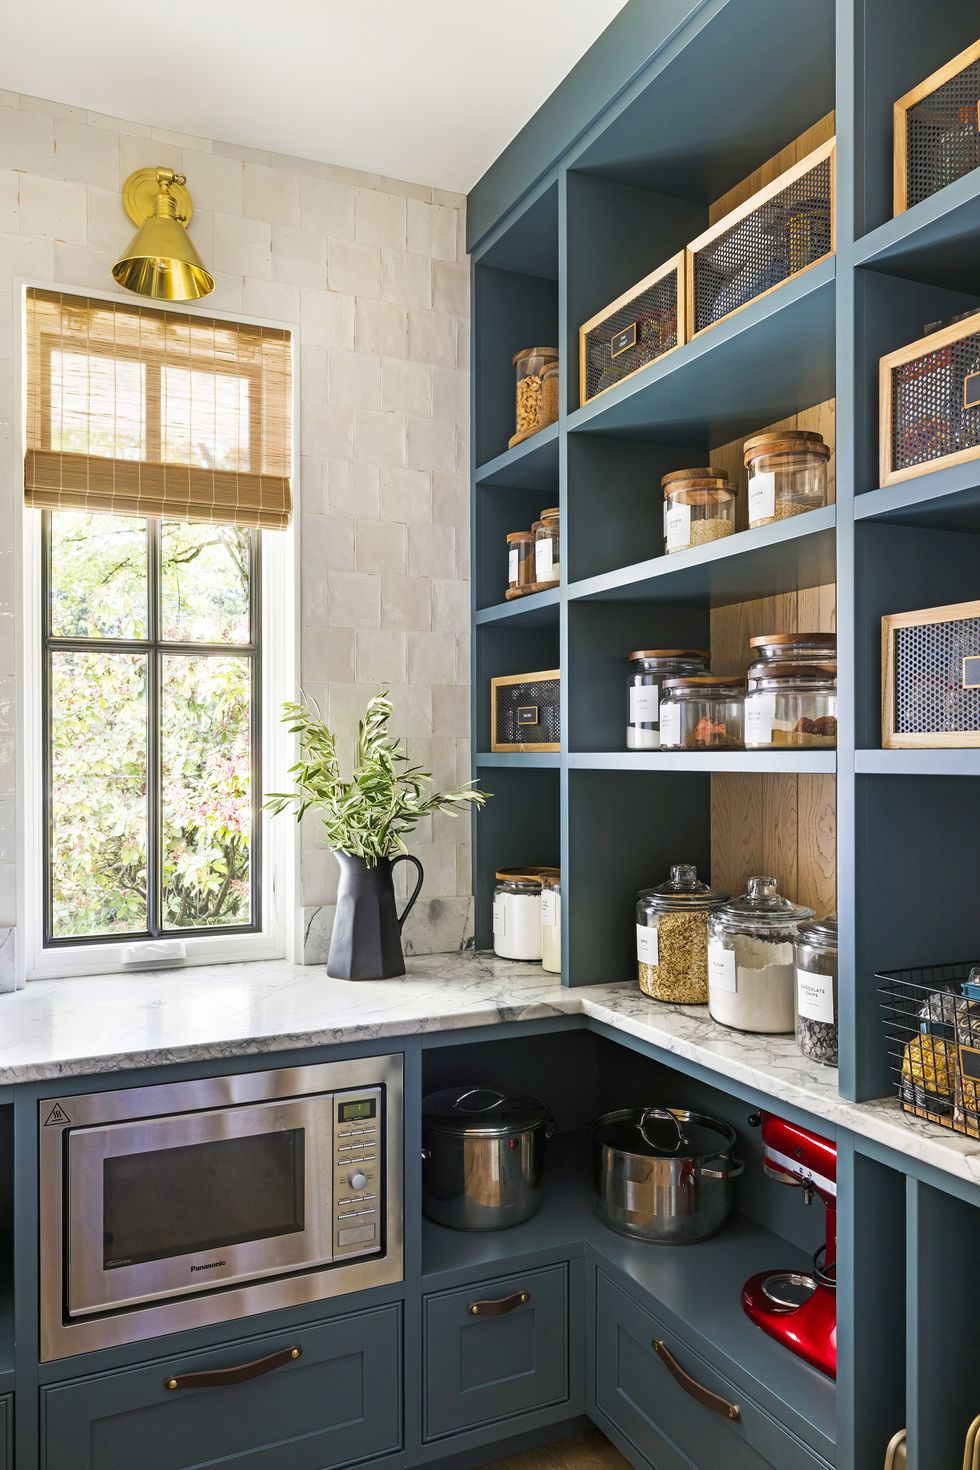 28 Pantry Ideas to Make Your Kitchen More Stylish